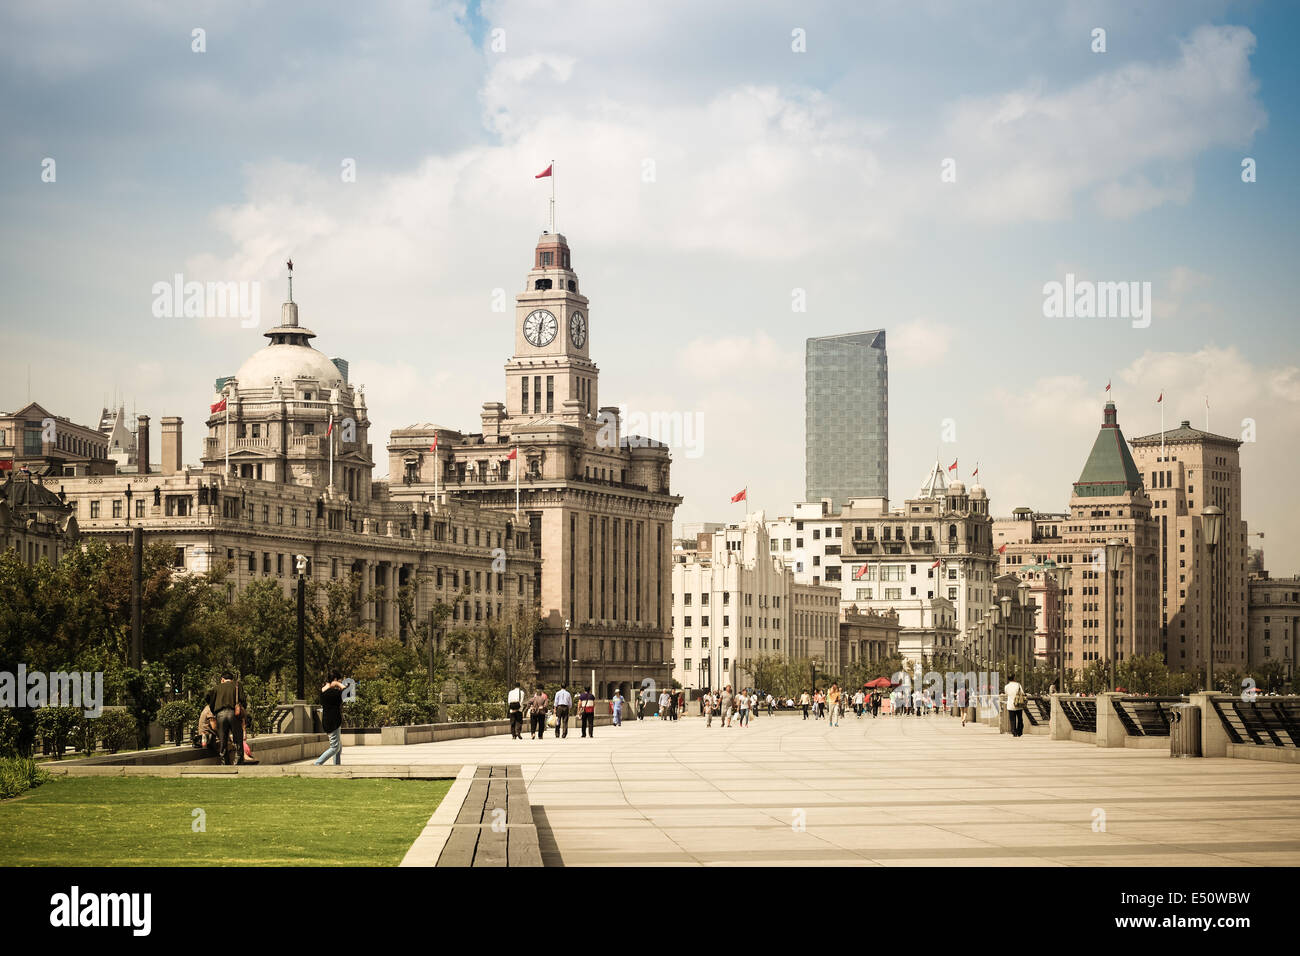 cityscape of the bund in shanghai Stock Photo